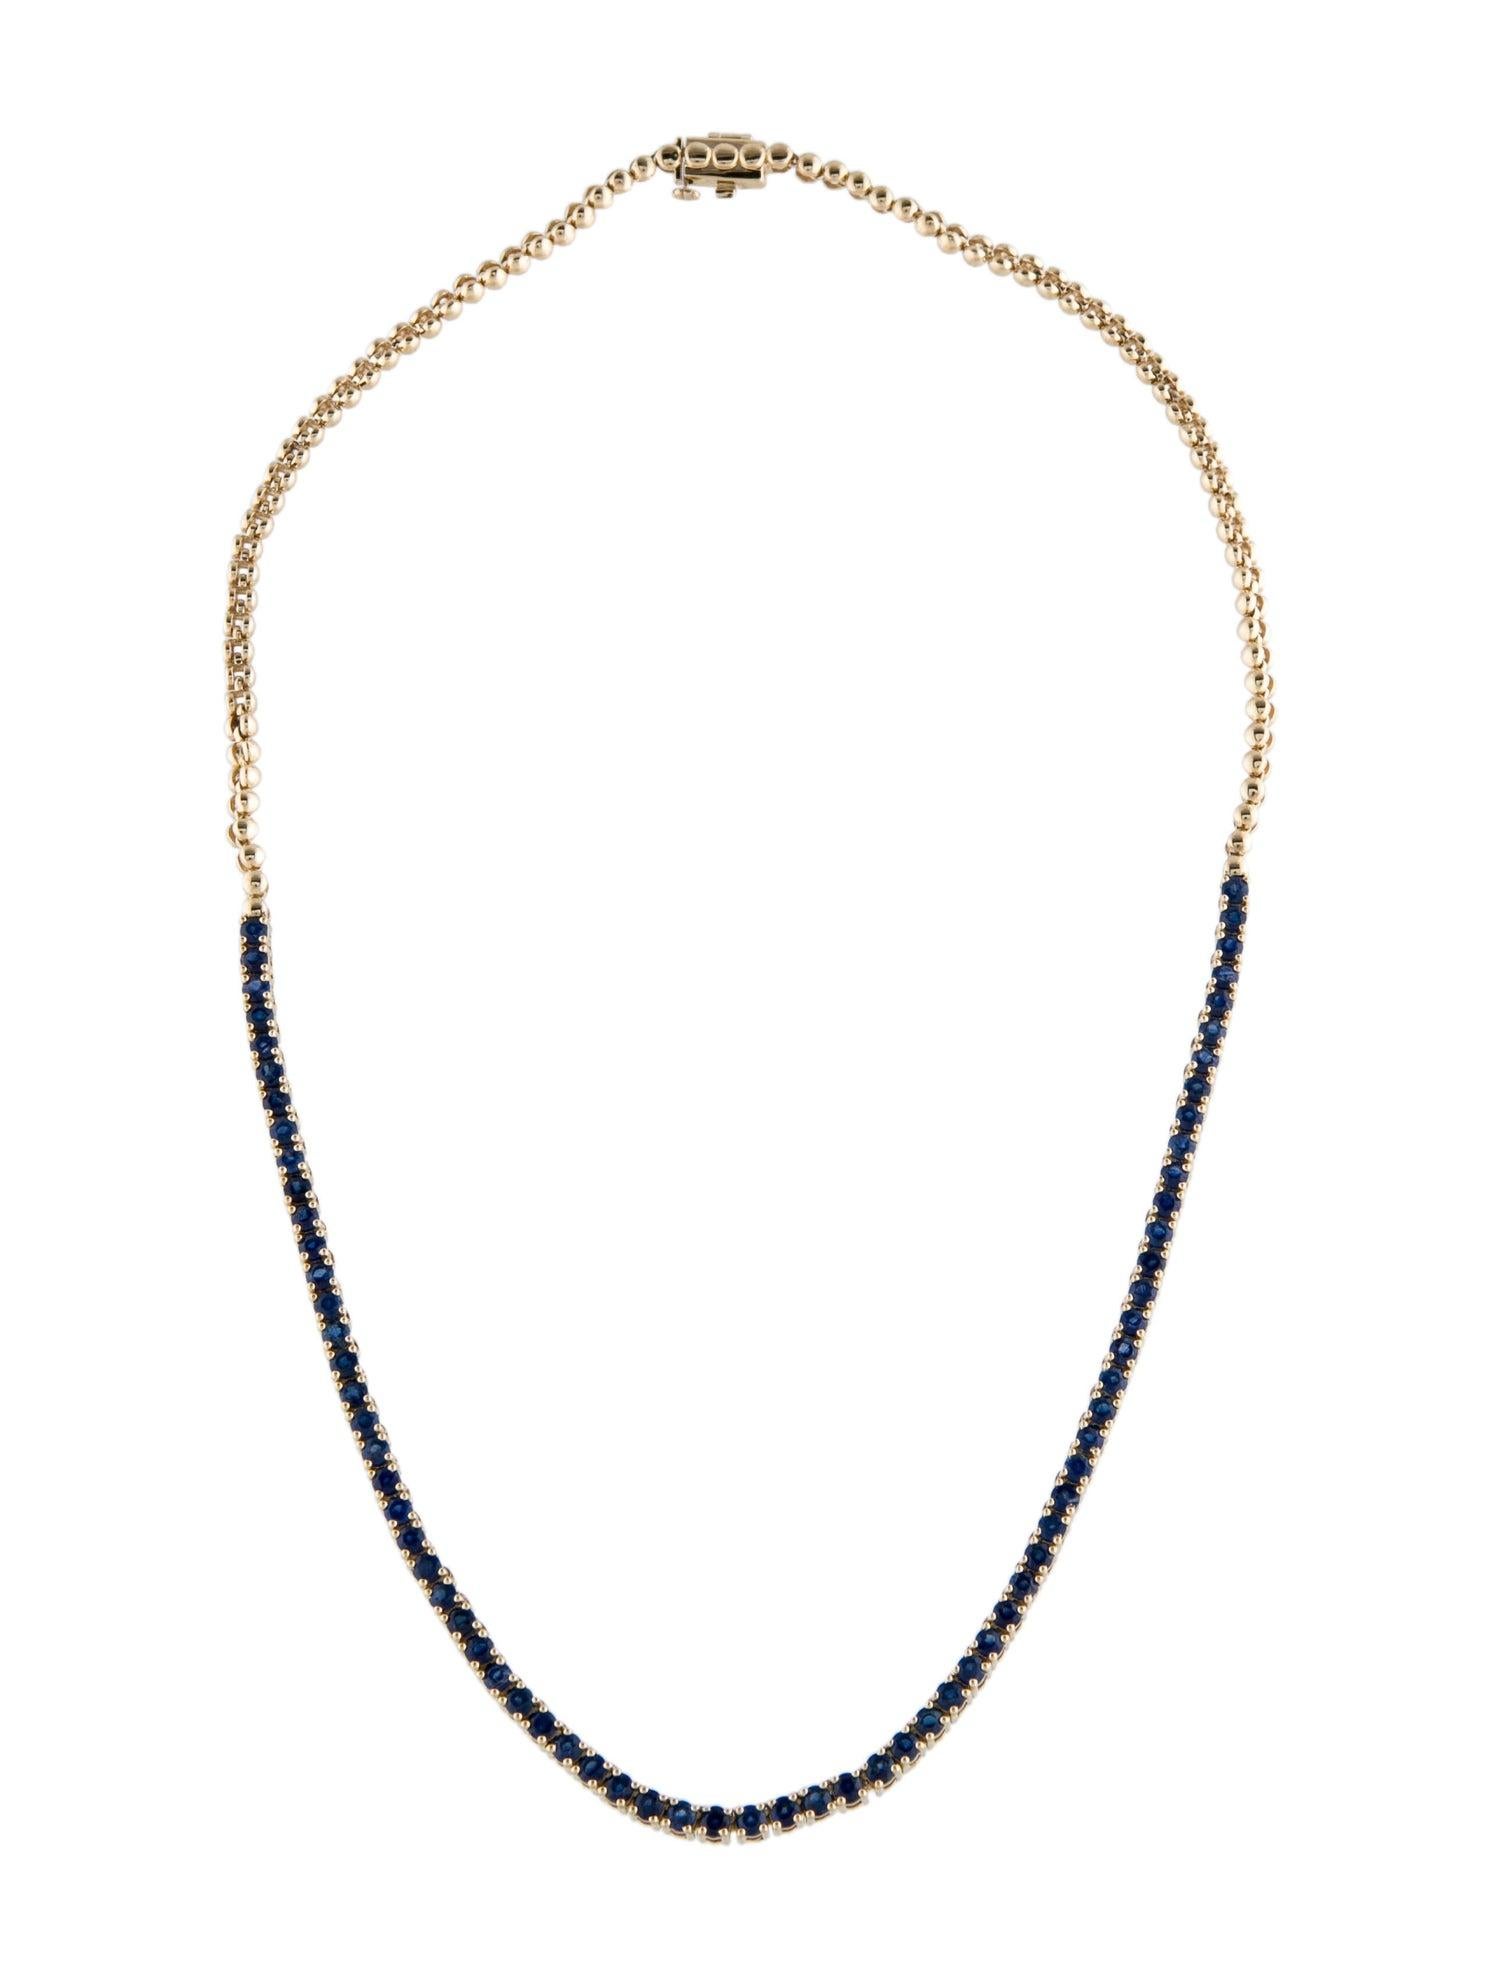 Dive into the tranquil beauty of the ocean with our Seaside Serenity Sapphire Necklace. Crafted with meticulous care and adorned with genuine, natural Sapphires, this necklace is an exquisite representation of nature's elegance.

The soothing blue